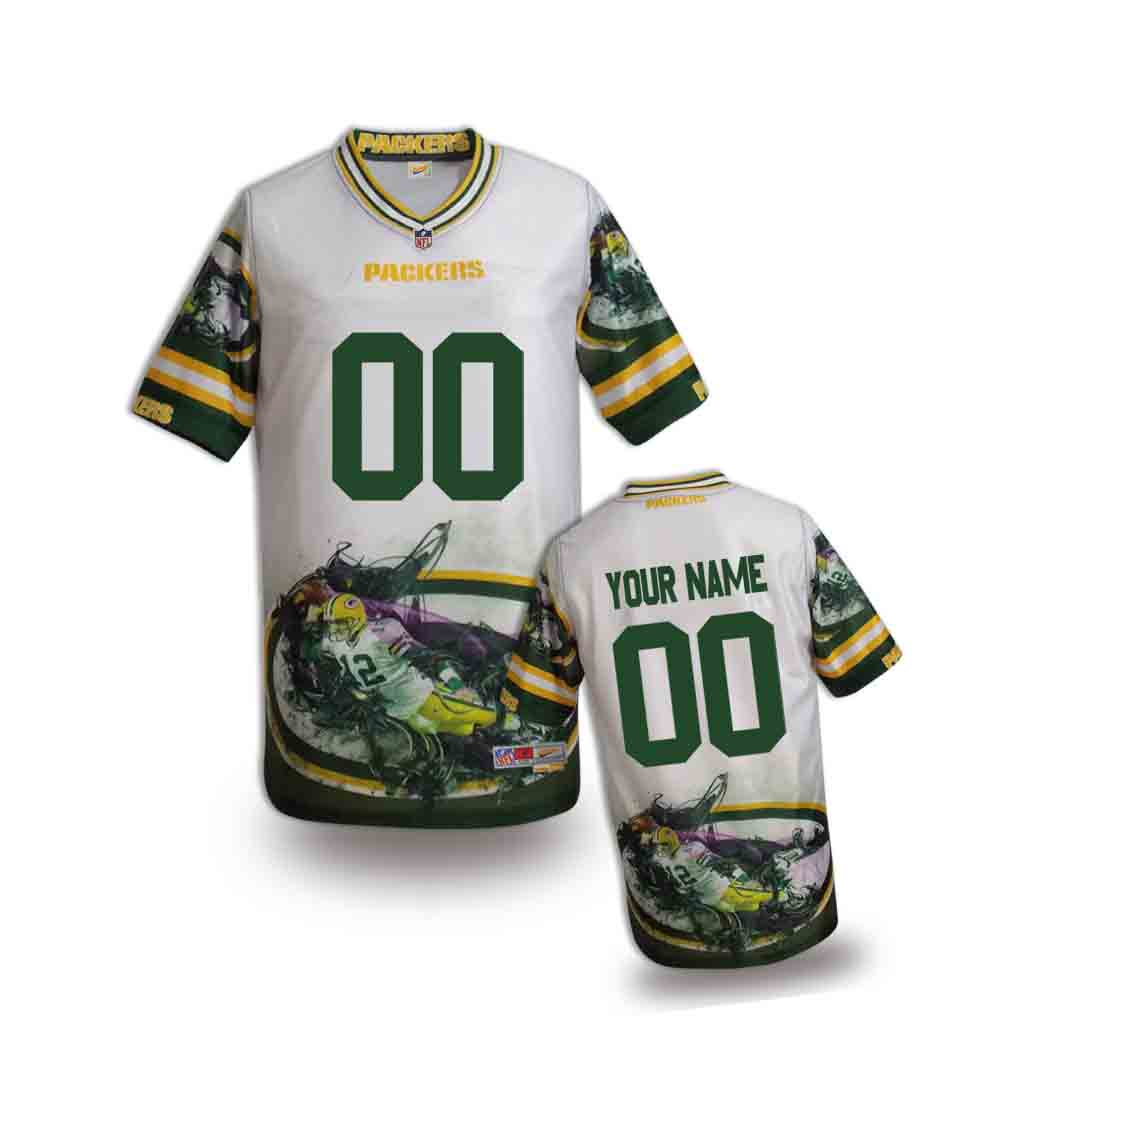 Nike Packers Customized Fashion Stitched Youth Jerseys03 - Click Image to Close